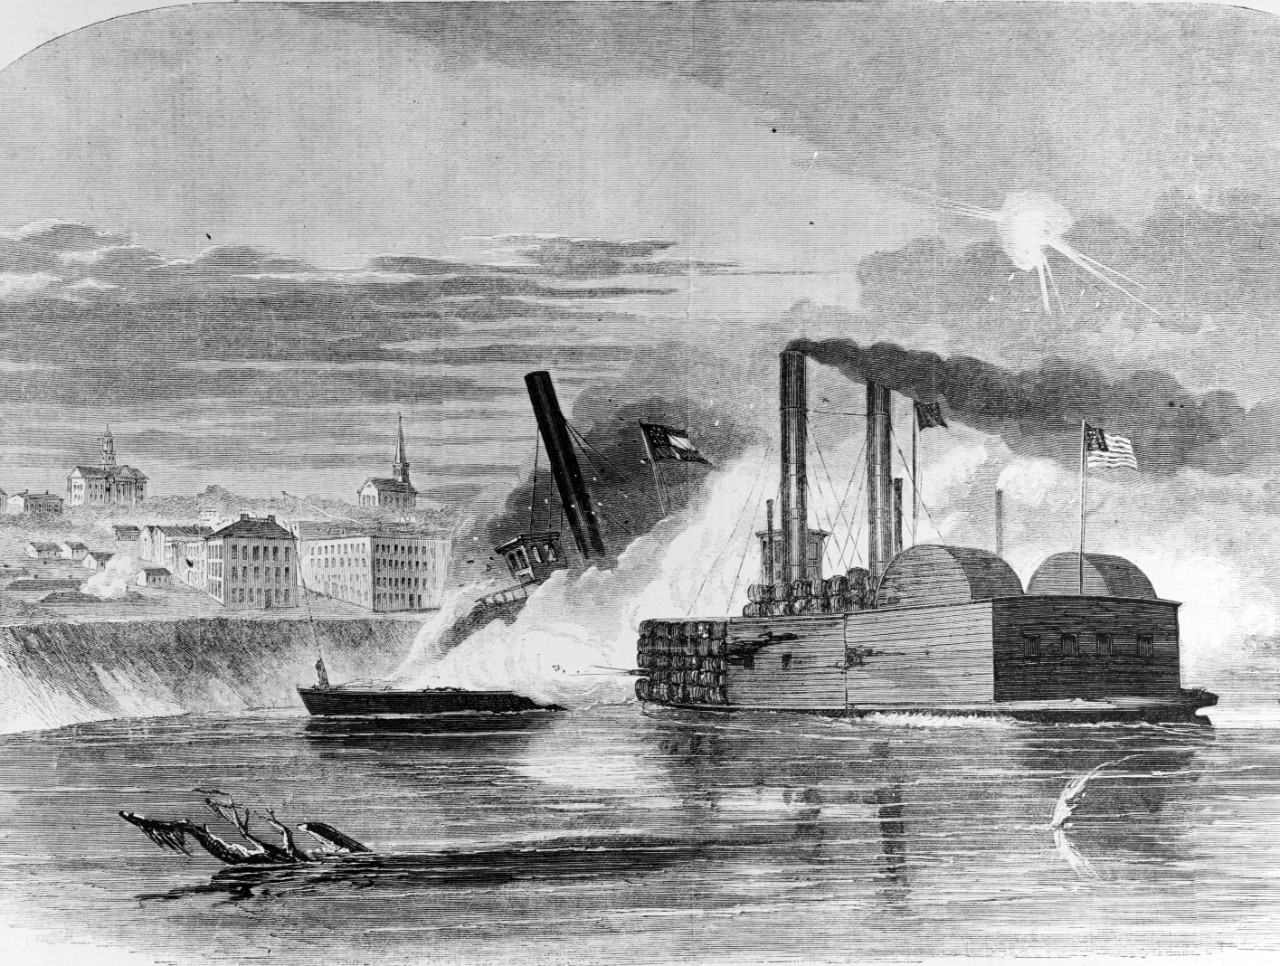 Photo #: NH 59106 The Federal Ram 'Queen of the West' attacking the Rebel Gun-boat 'Vicksburg' off Vicksburg Line engraving published in Harper's Weekly, 1863, depicting the 2 February 1863 attack by U.S. Ram Queen of the West on the Confederate steamer City of Vicksburg off Vicksburg, Mississippi."